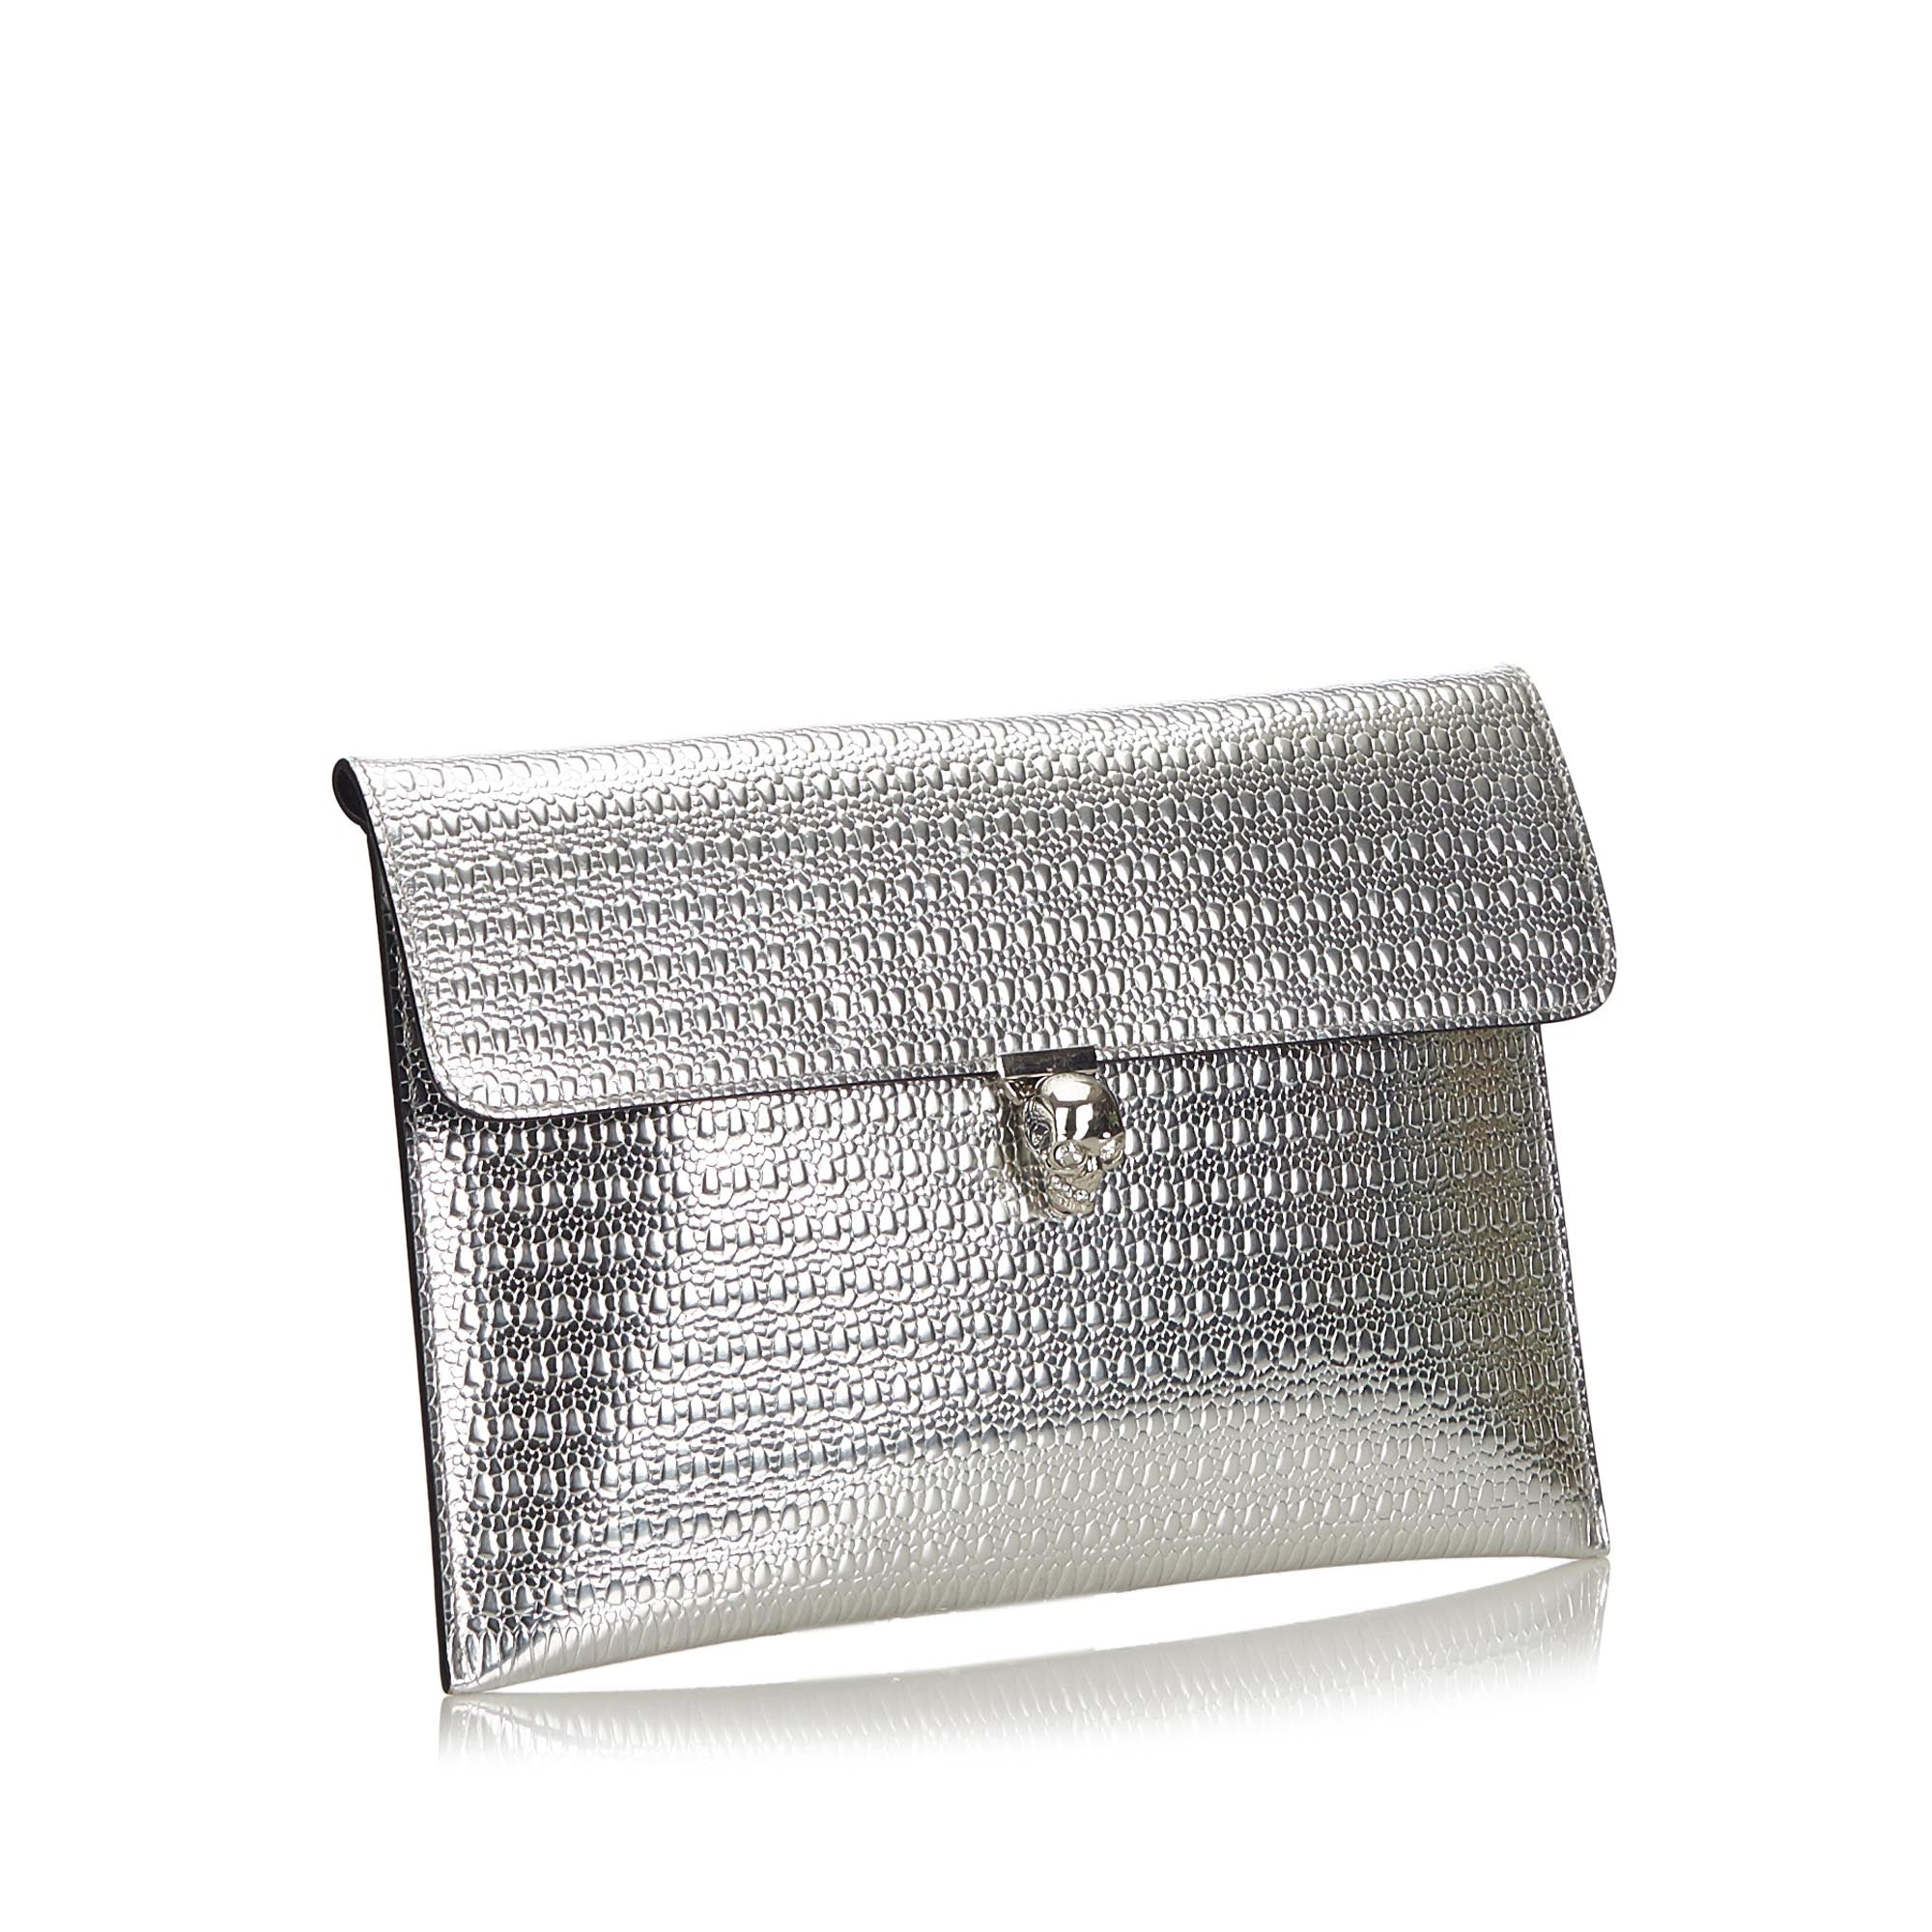 Buy & Consign Authentic Alexander Mcqueen Skull Clutch Bag Silver at The Plush Posh